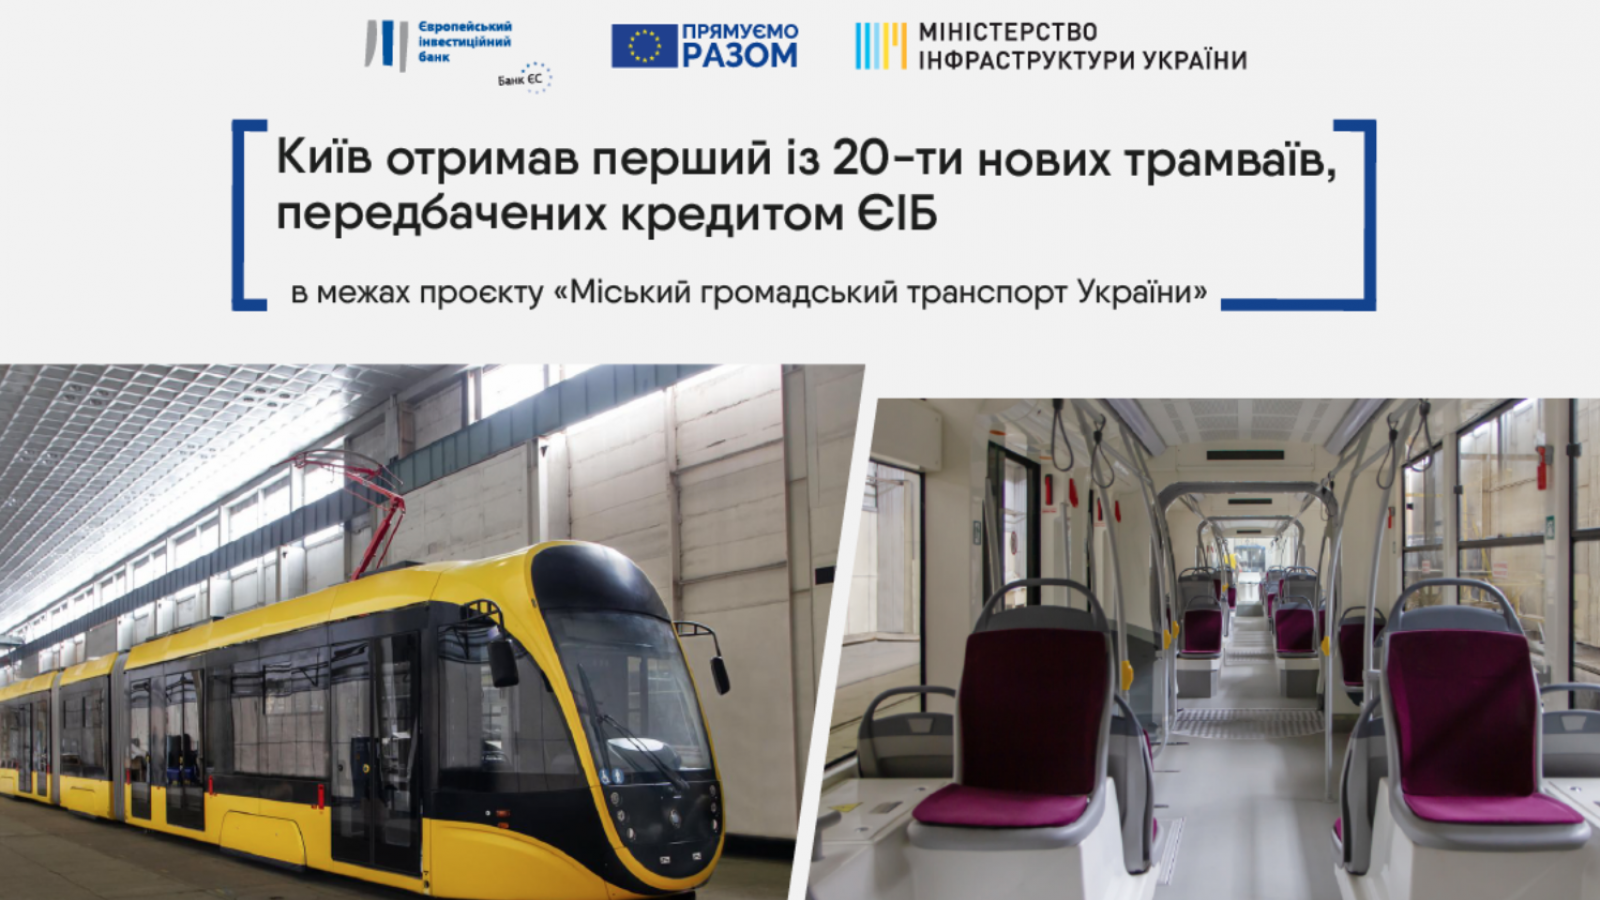 New trams for Kyiv with EU support